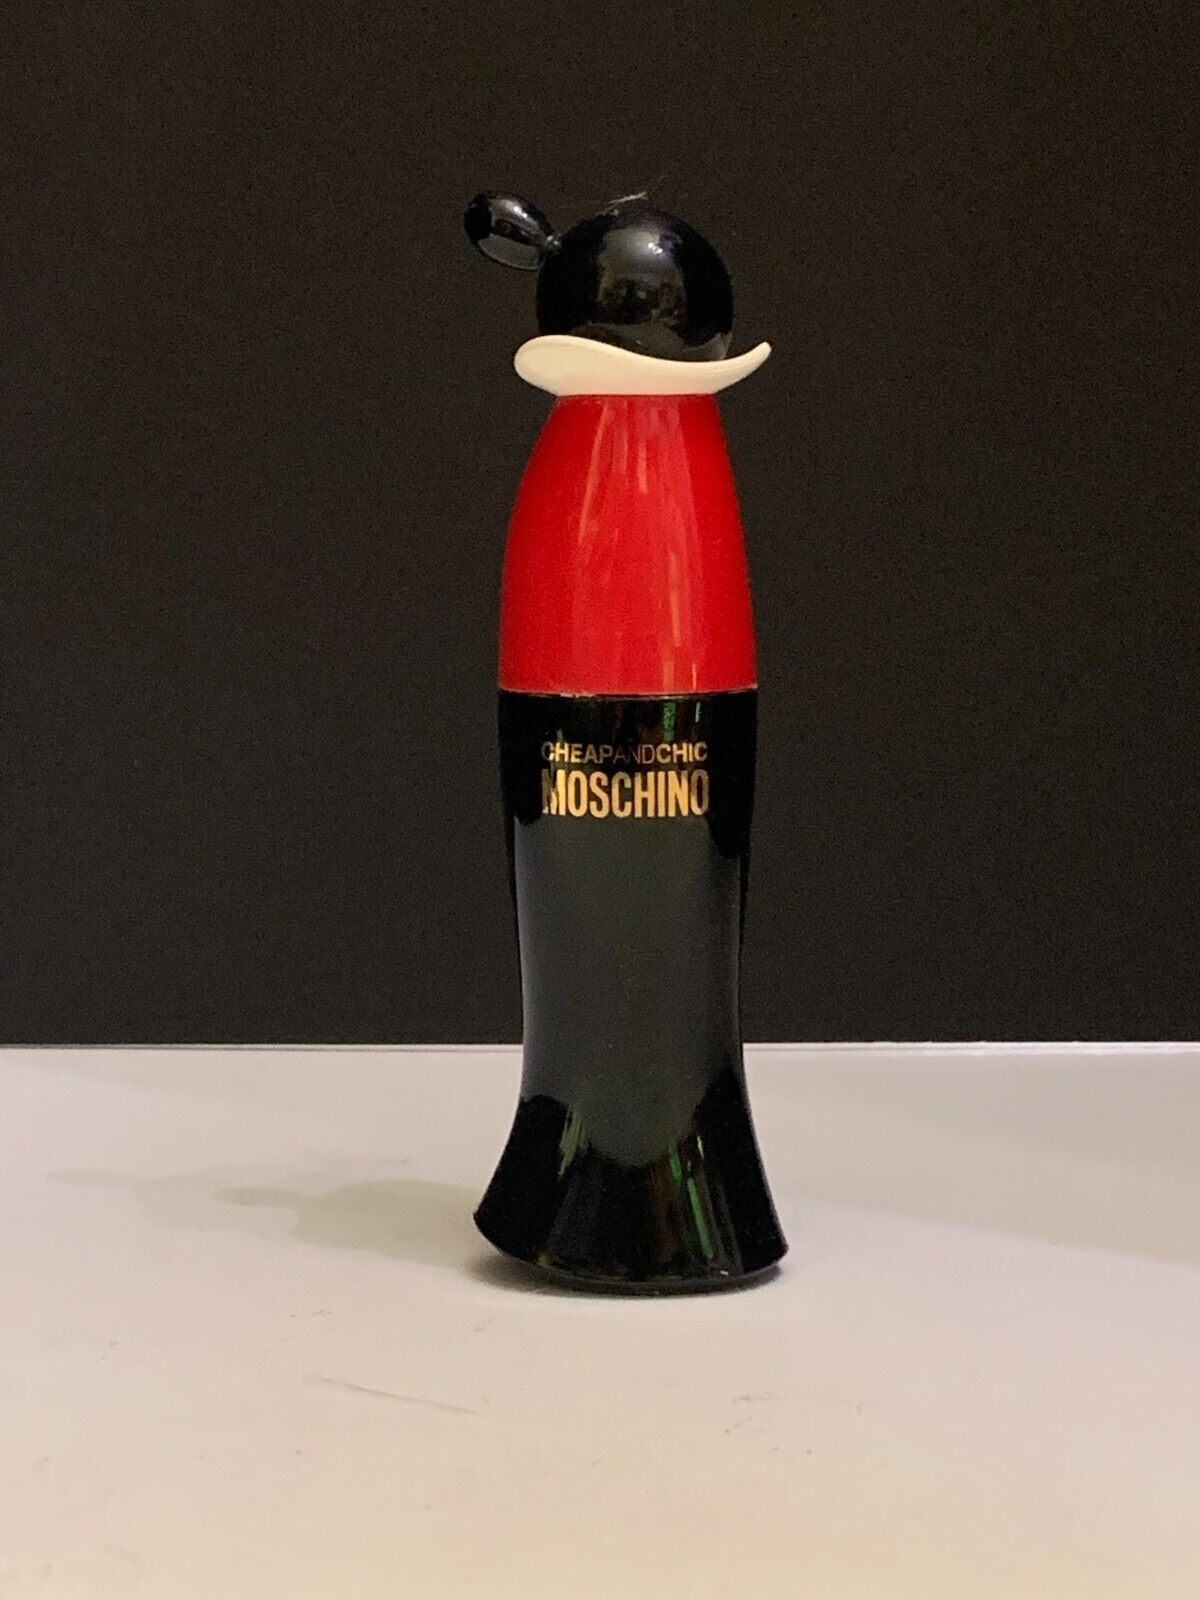 Moschino Cheap And Chic Perfume Bottle Empty